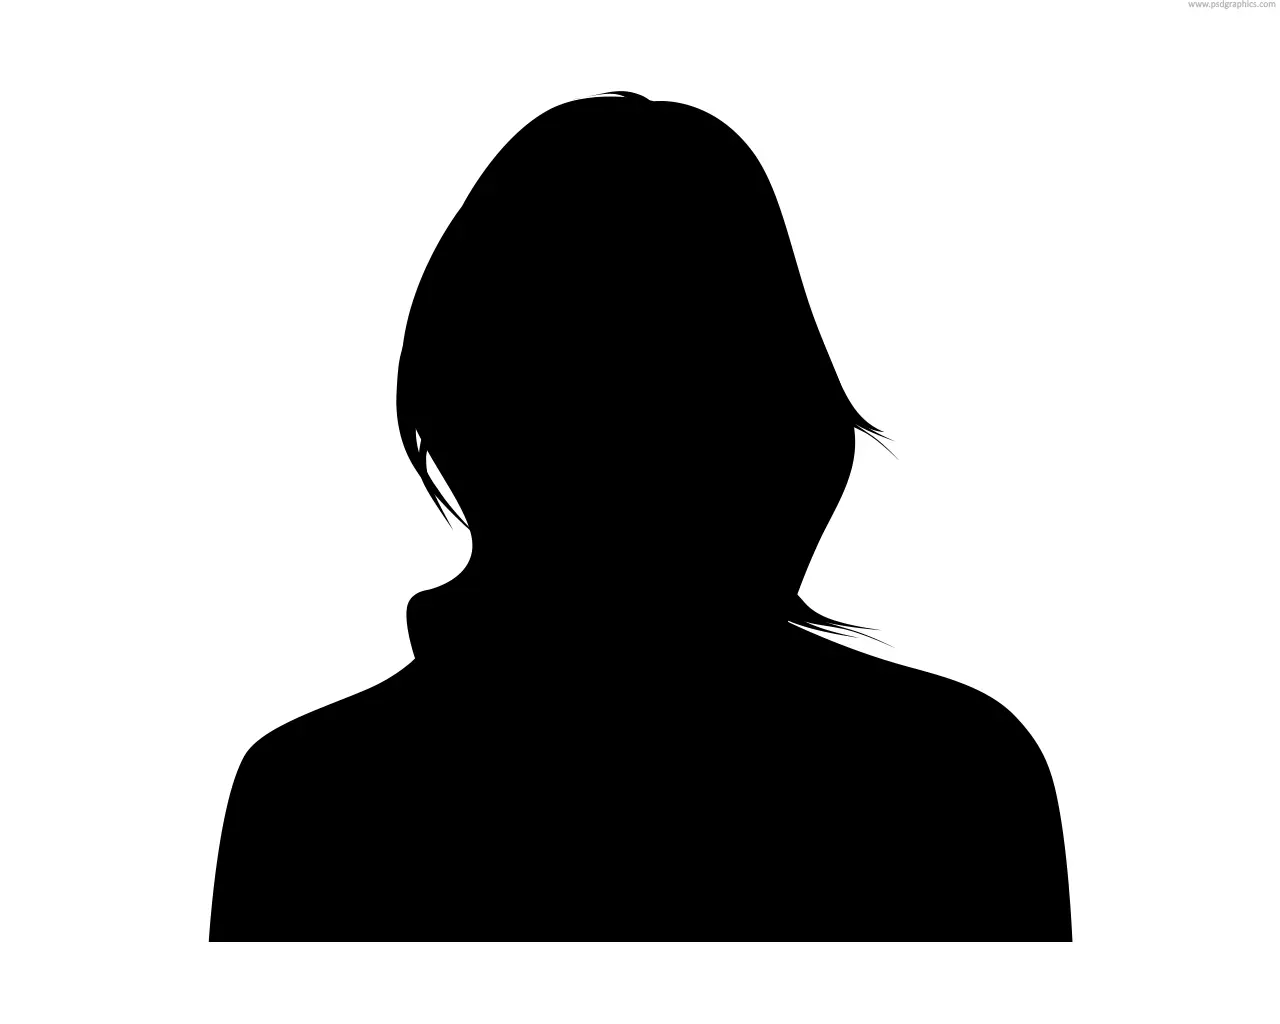 Placeholder headshot silhouette for a Women's Bean Project staff member.